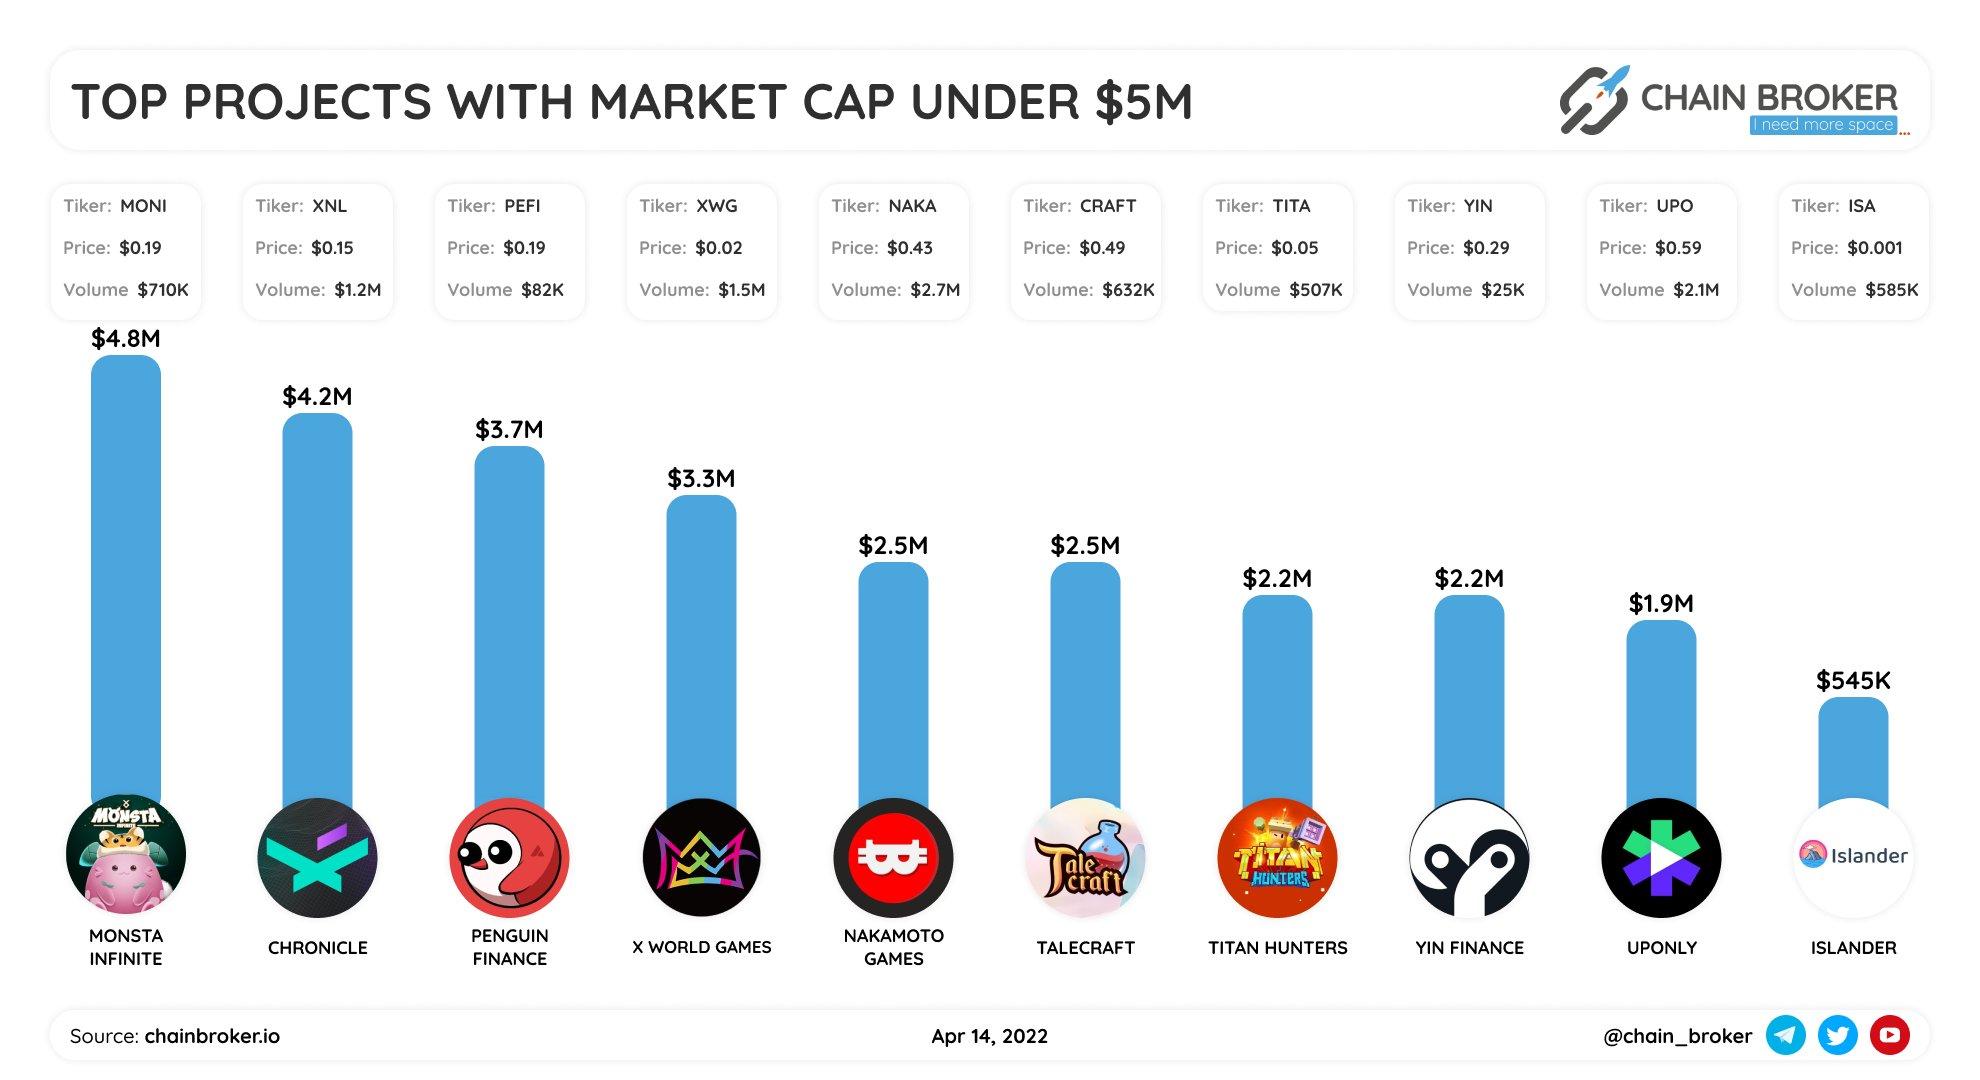 Top projects with market cap under $5M